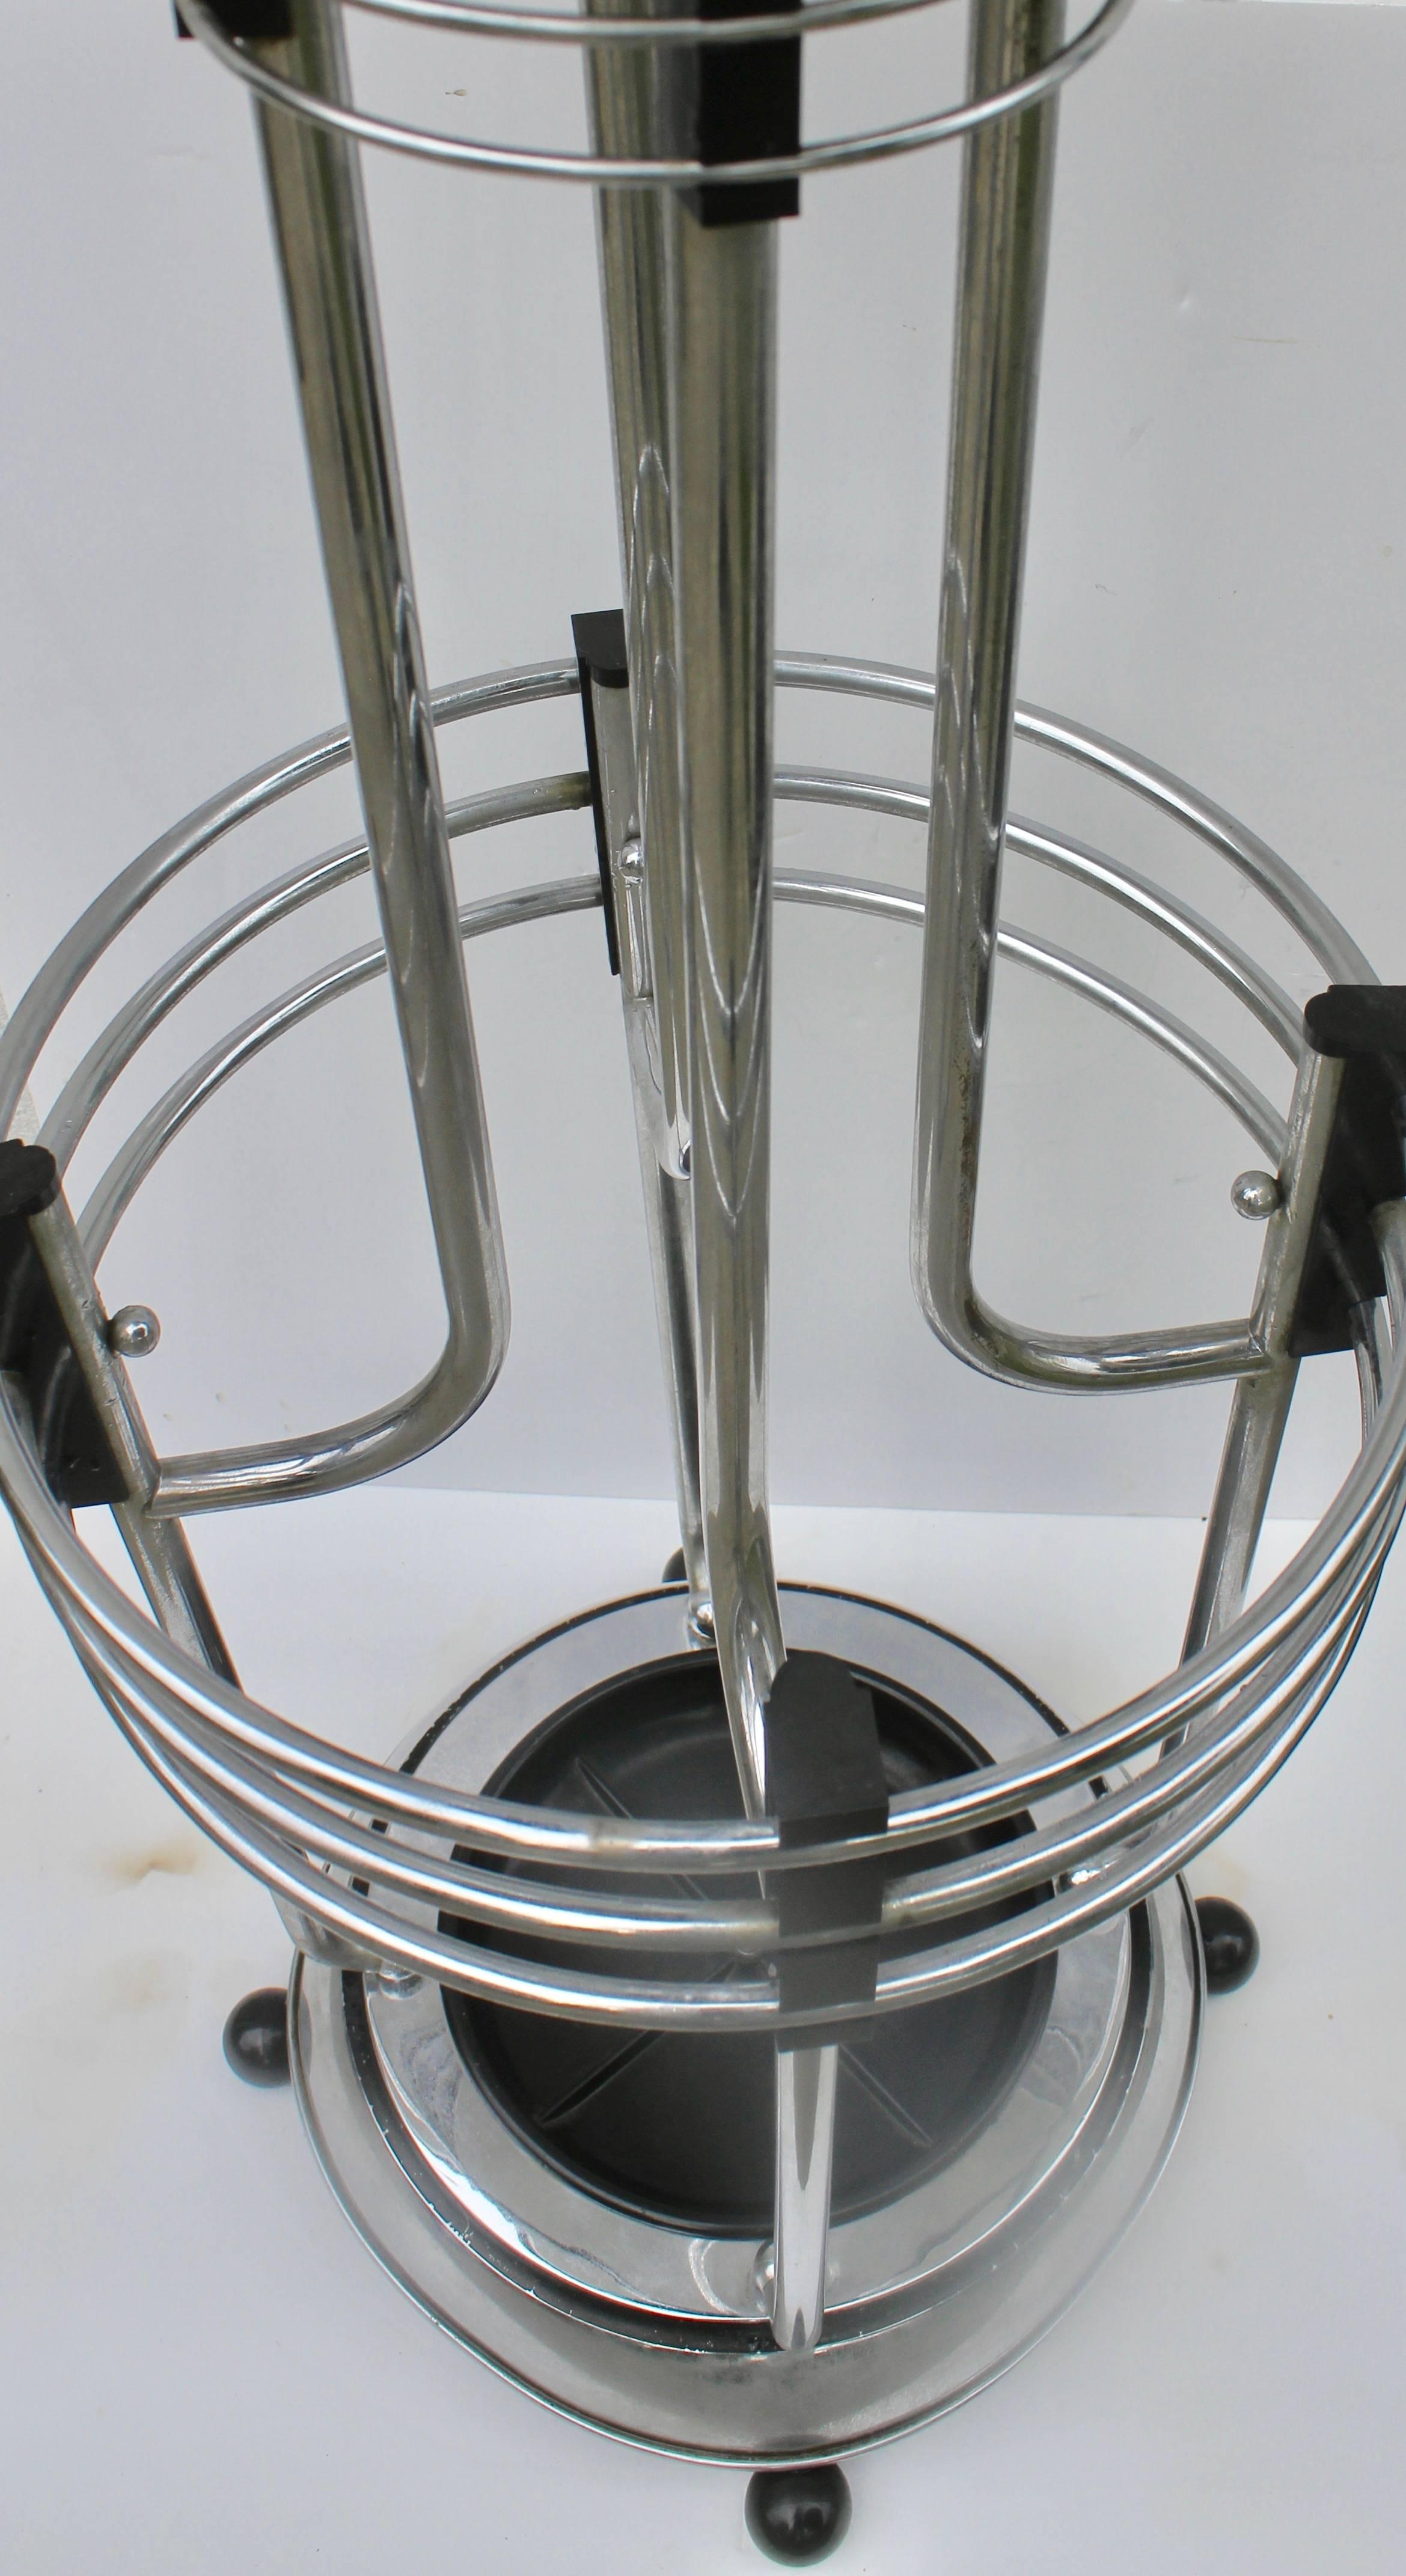 Mid-20th Century Art Deco Umbrella Planter Stand from a Movie Theatre Vintage Chrome and Bakelite